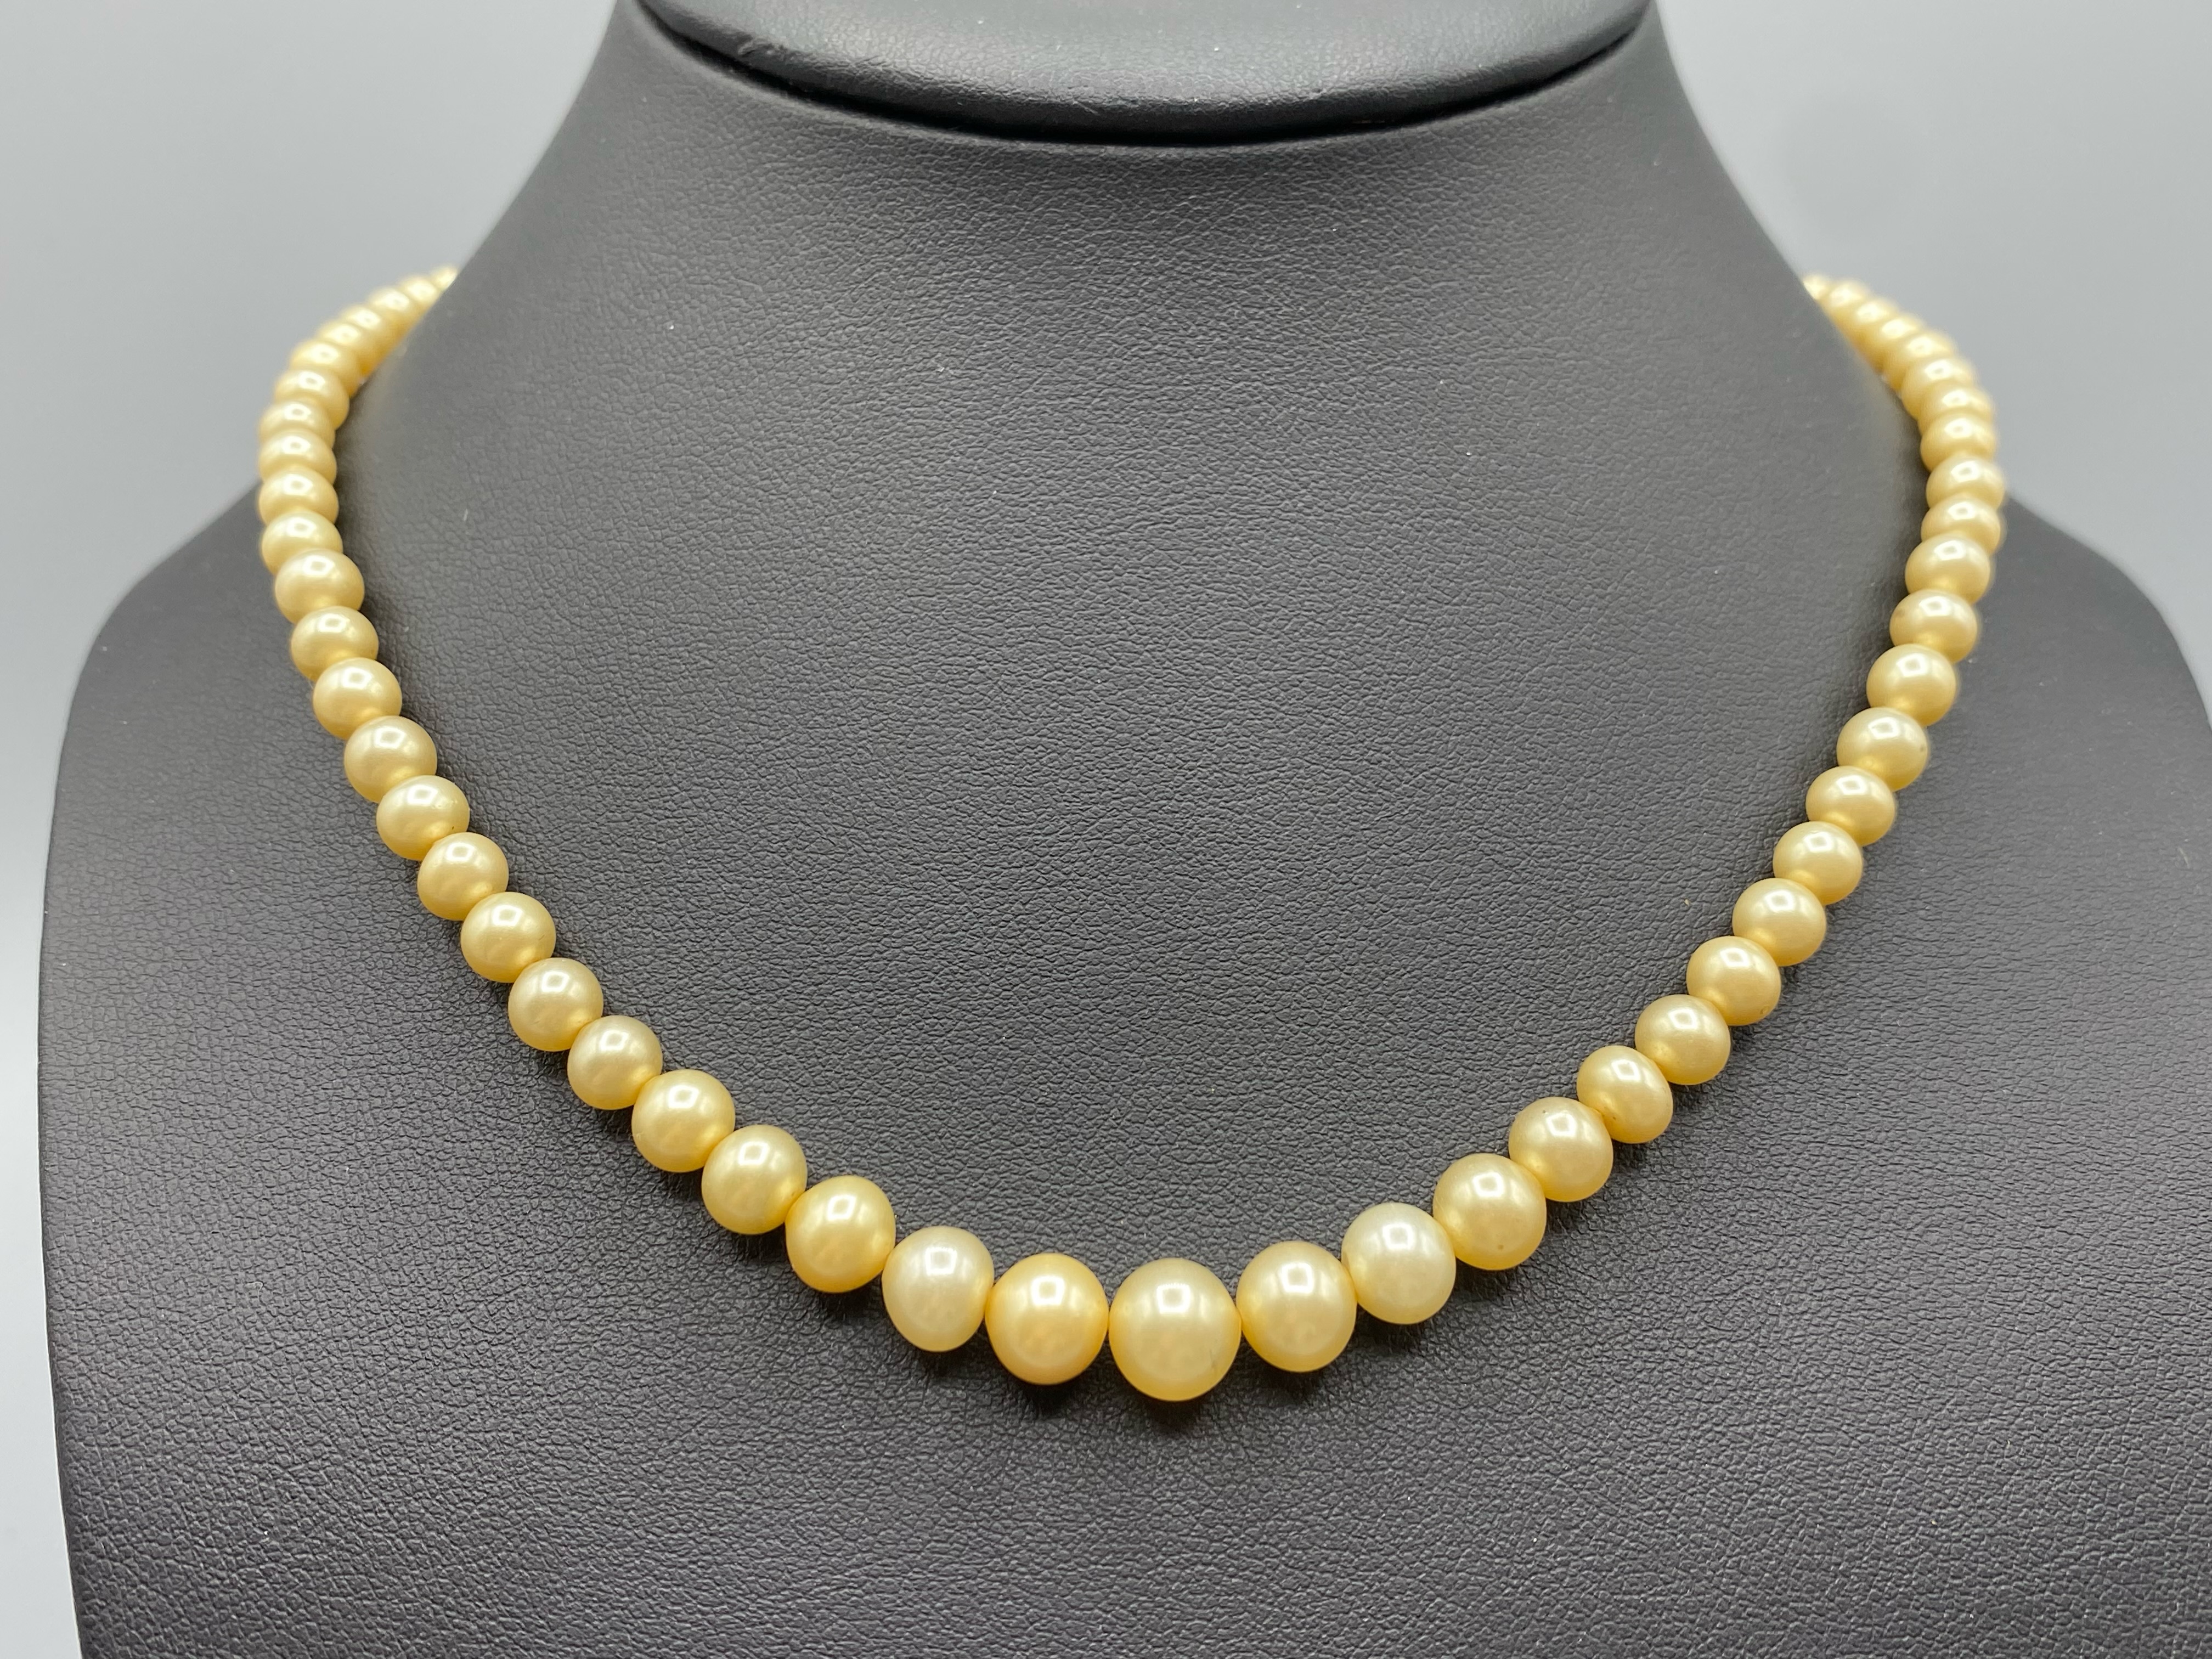 Antique Edwardian Pearl Necklace with 9ct Gold Clasp 63cm in length